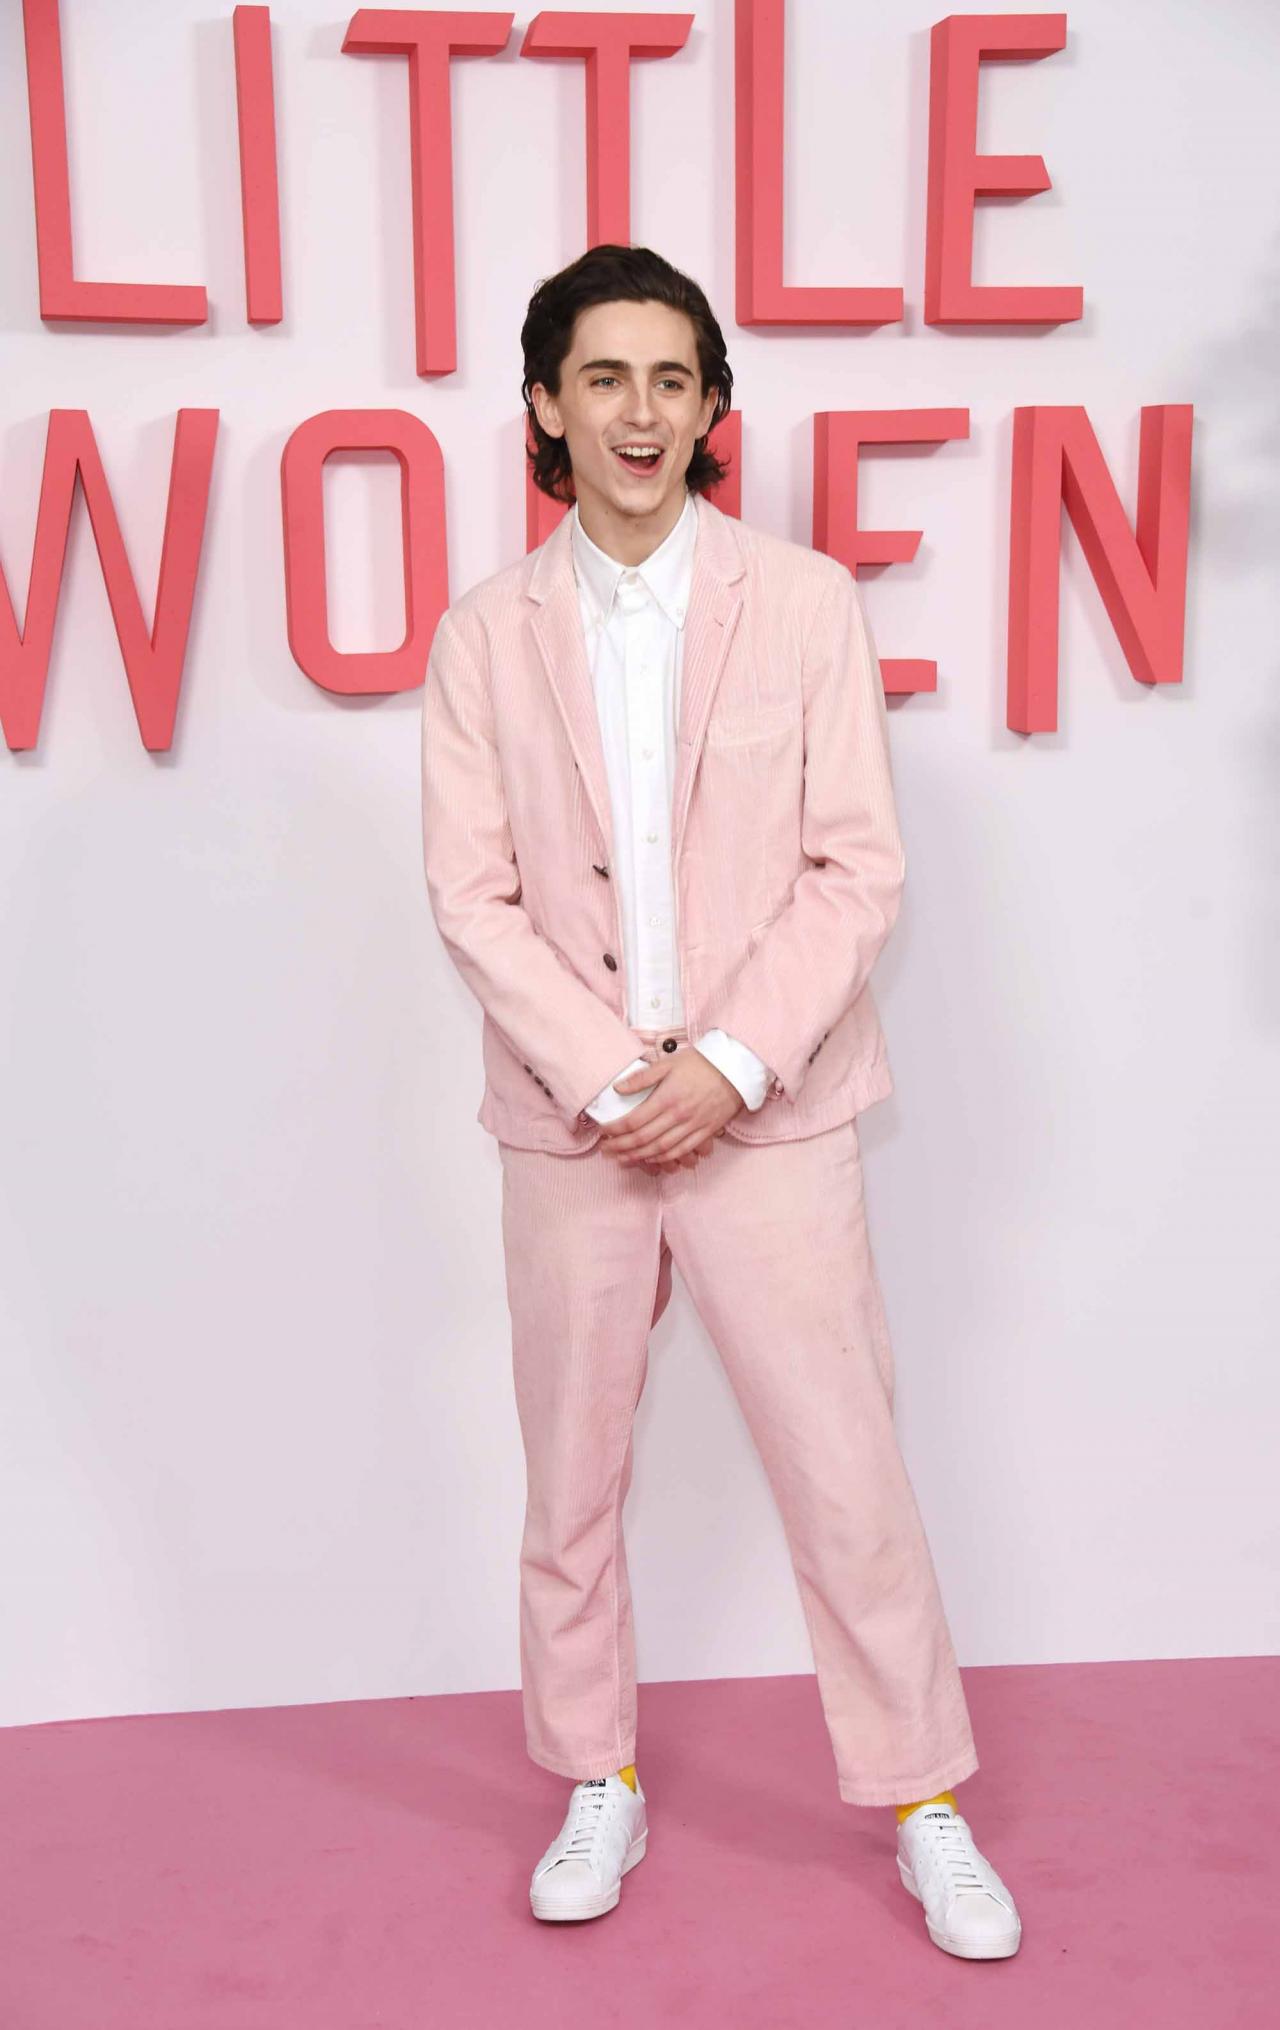 LONDON, ENGLAND - DECEMBER 15:   Timothee Chalamet poses at the evening photocall for "Little Women" at The Soho Hotel London on December 16, 2019 in London, England.  (Photo by David M. Benett/Dave Benett/WireImage)